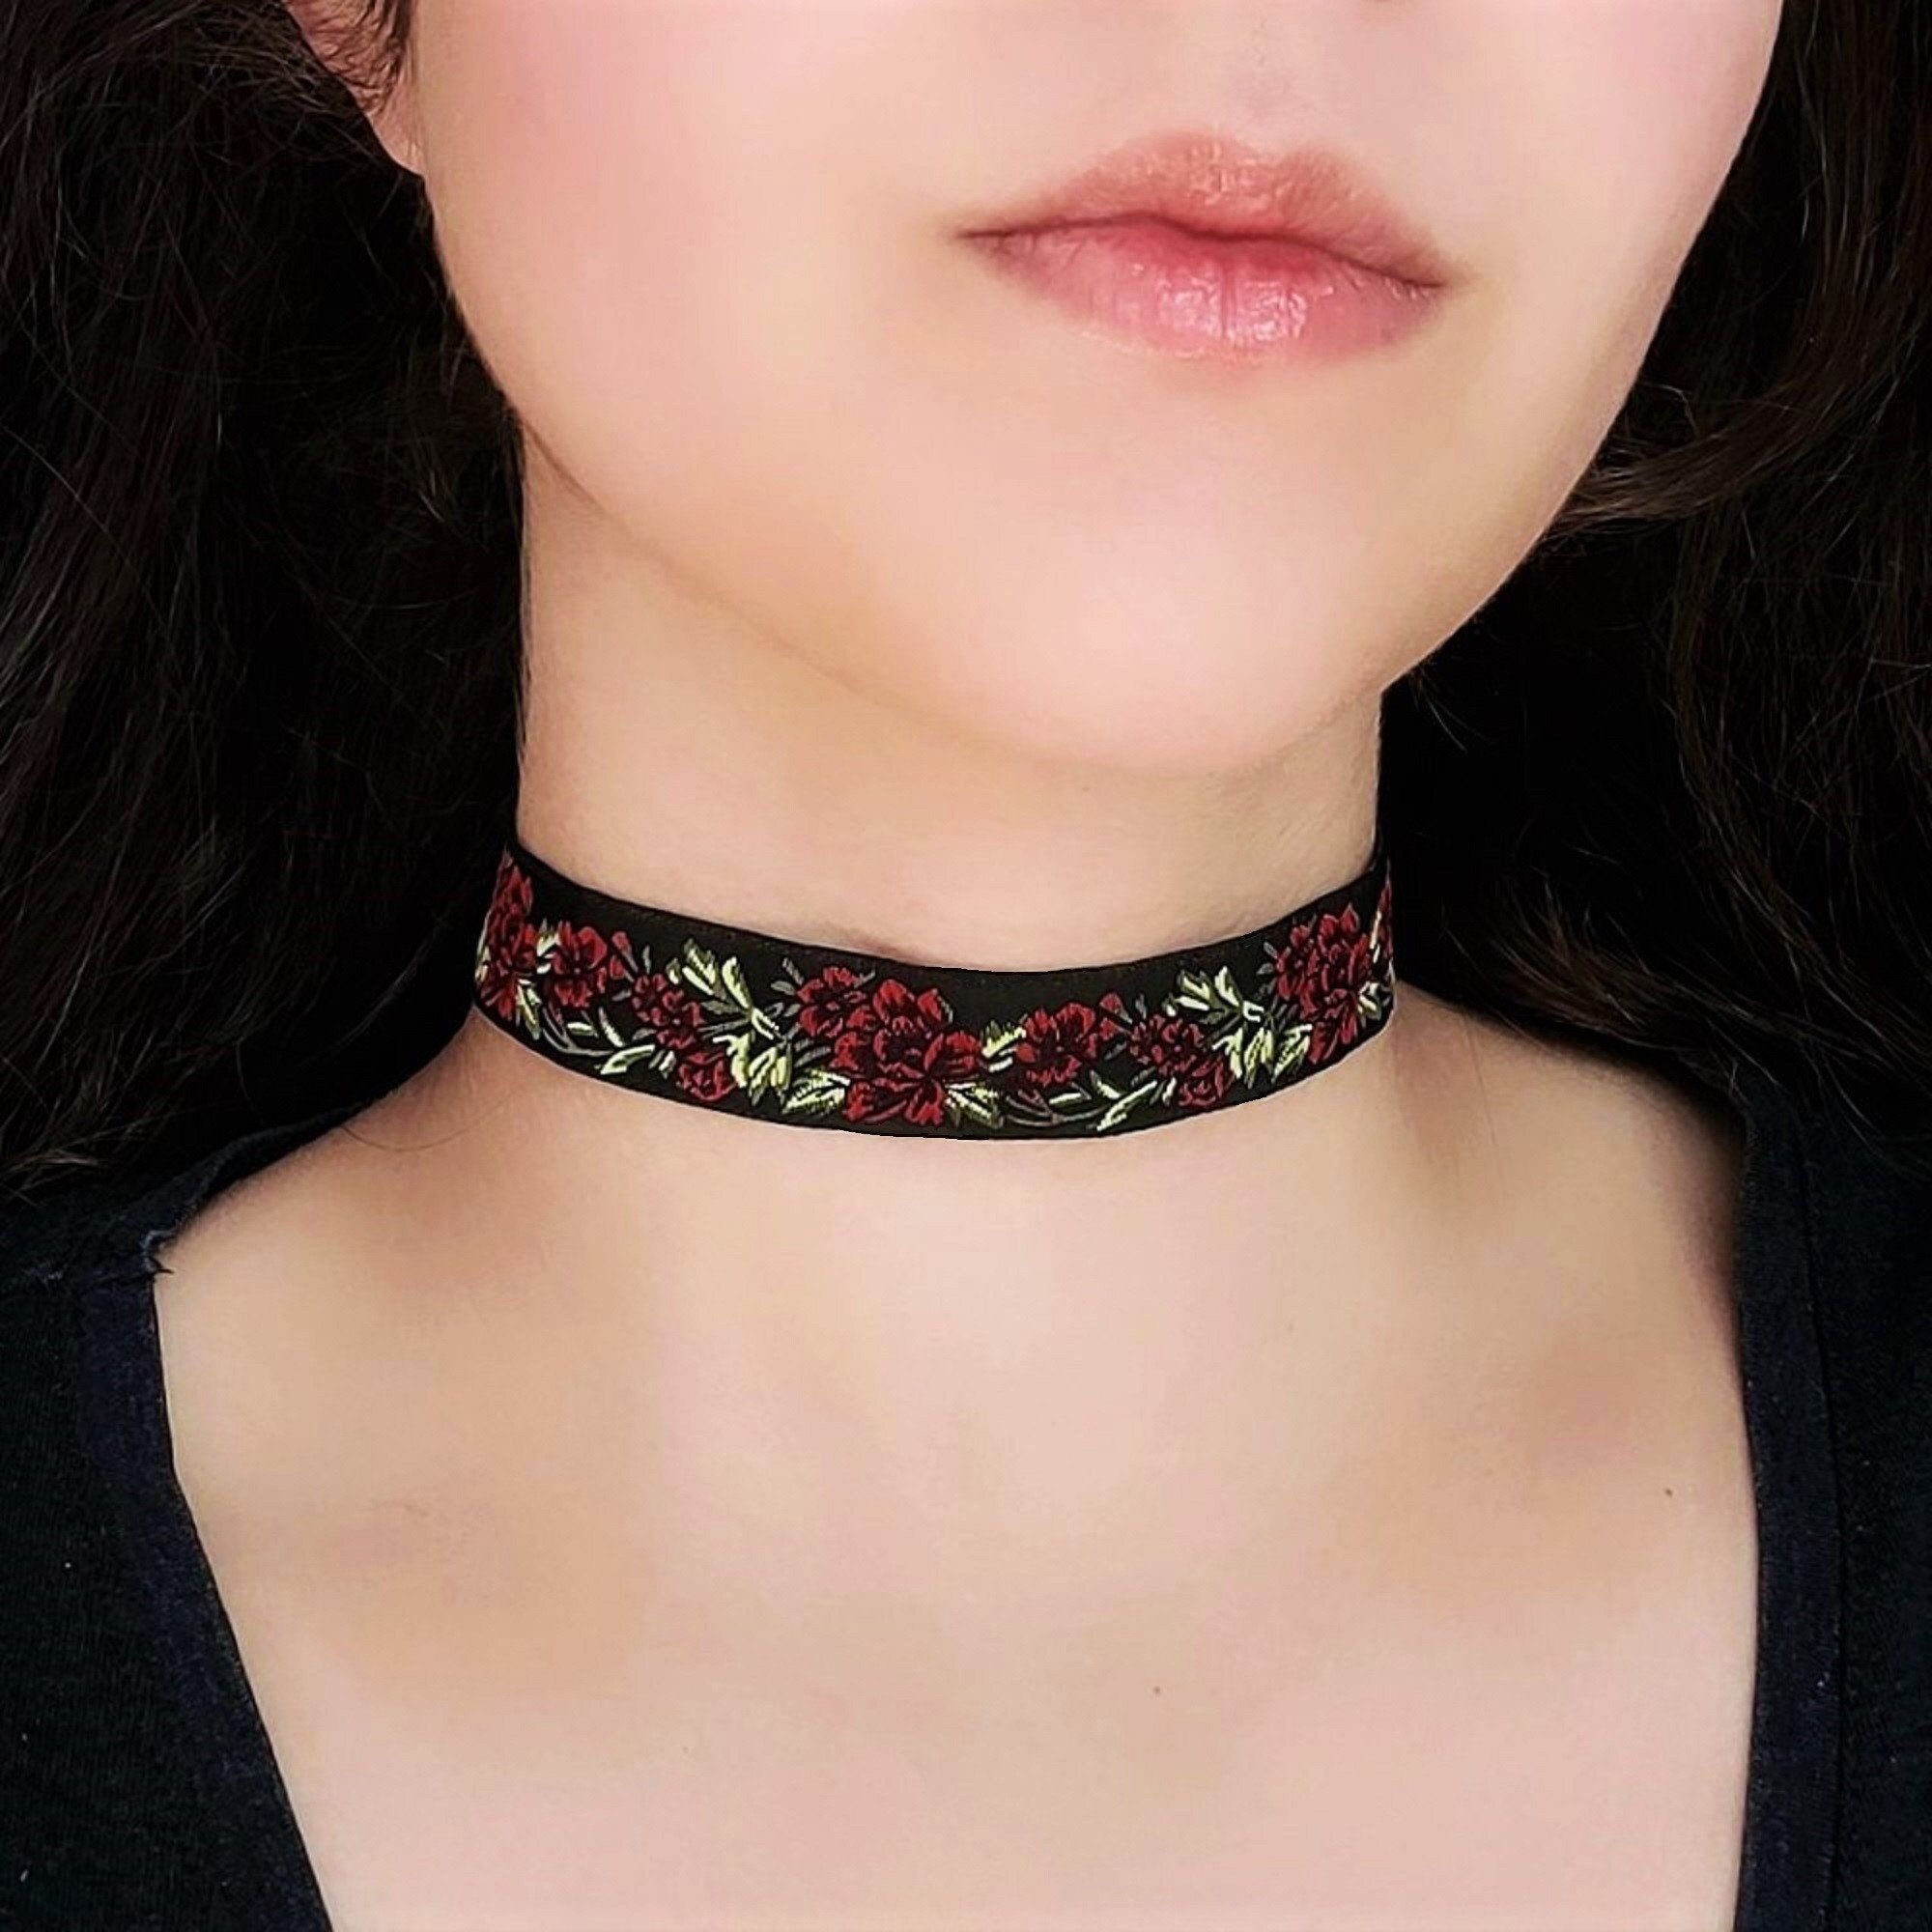 FLOWER RED ROSE CHOKER NECKLACE EMBROIDERED BOHO GOTHIC STEAMPUNK STATEMENT 